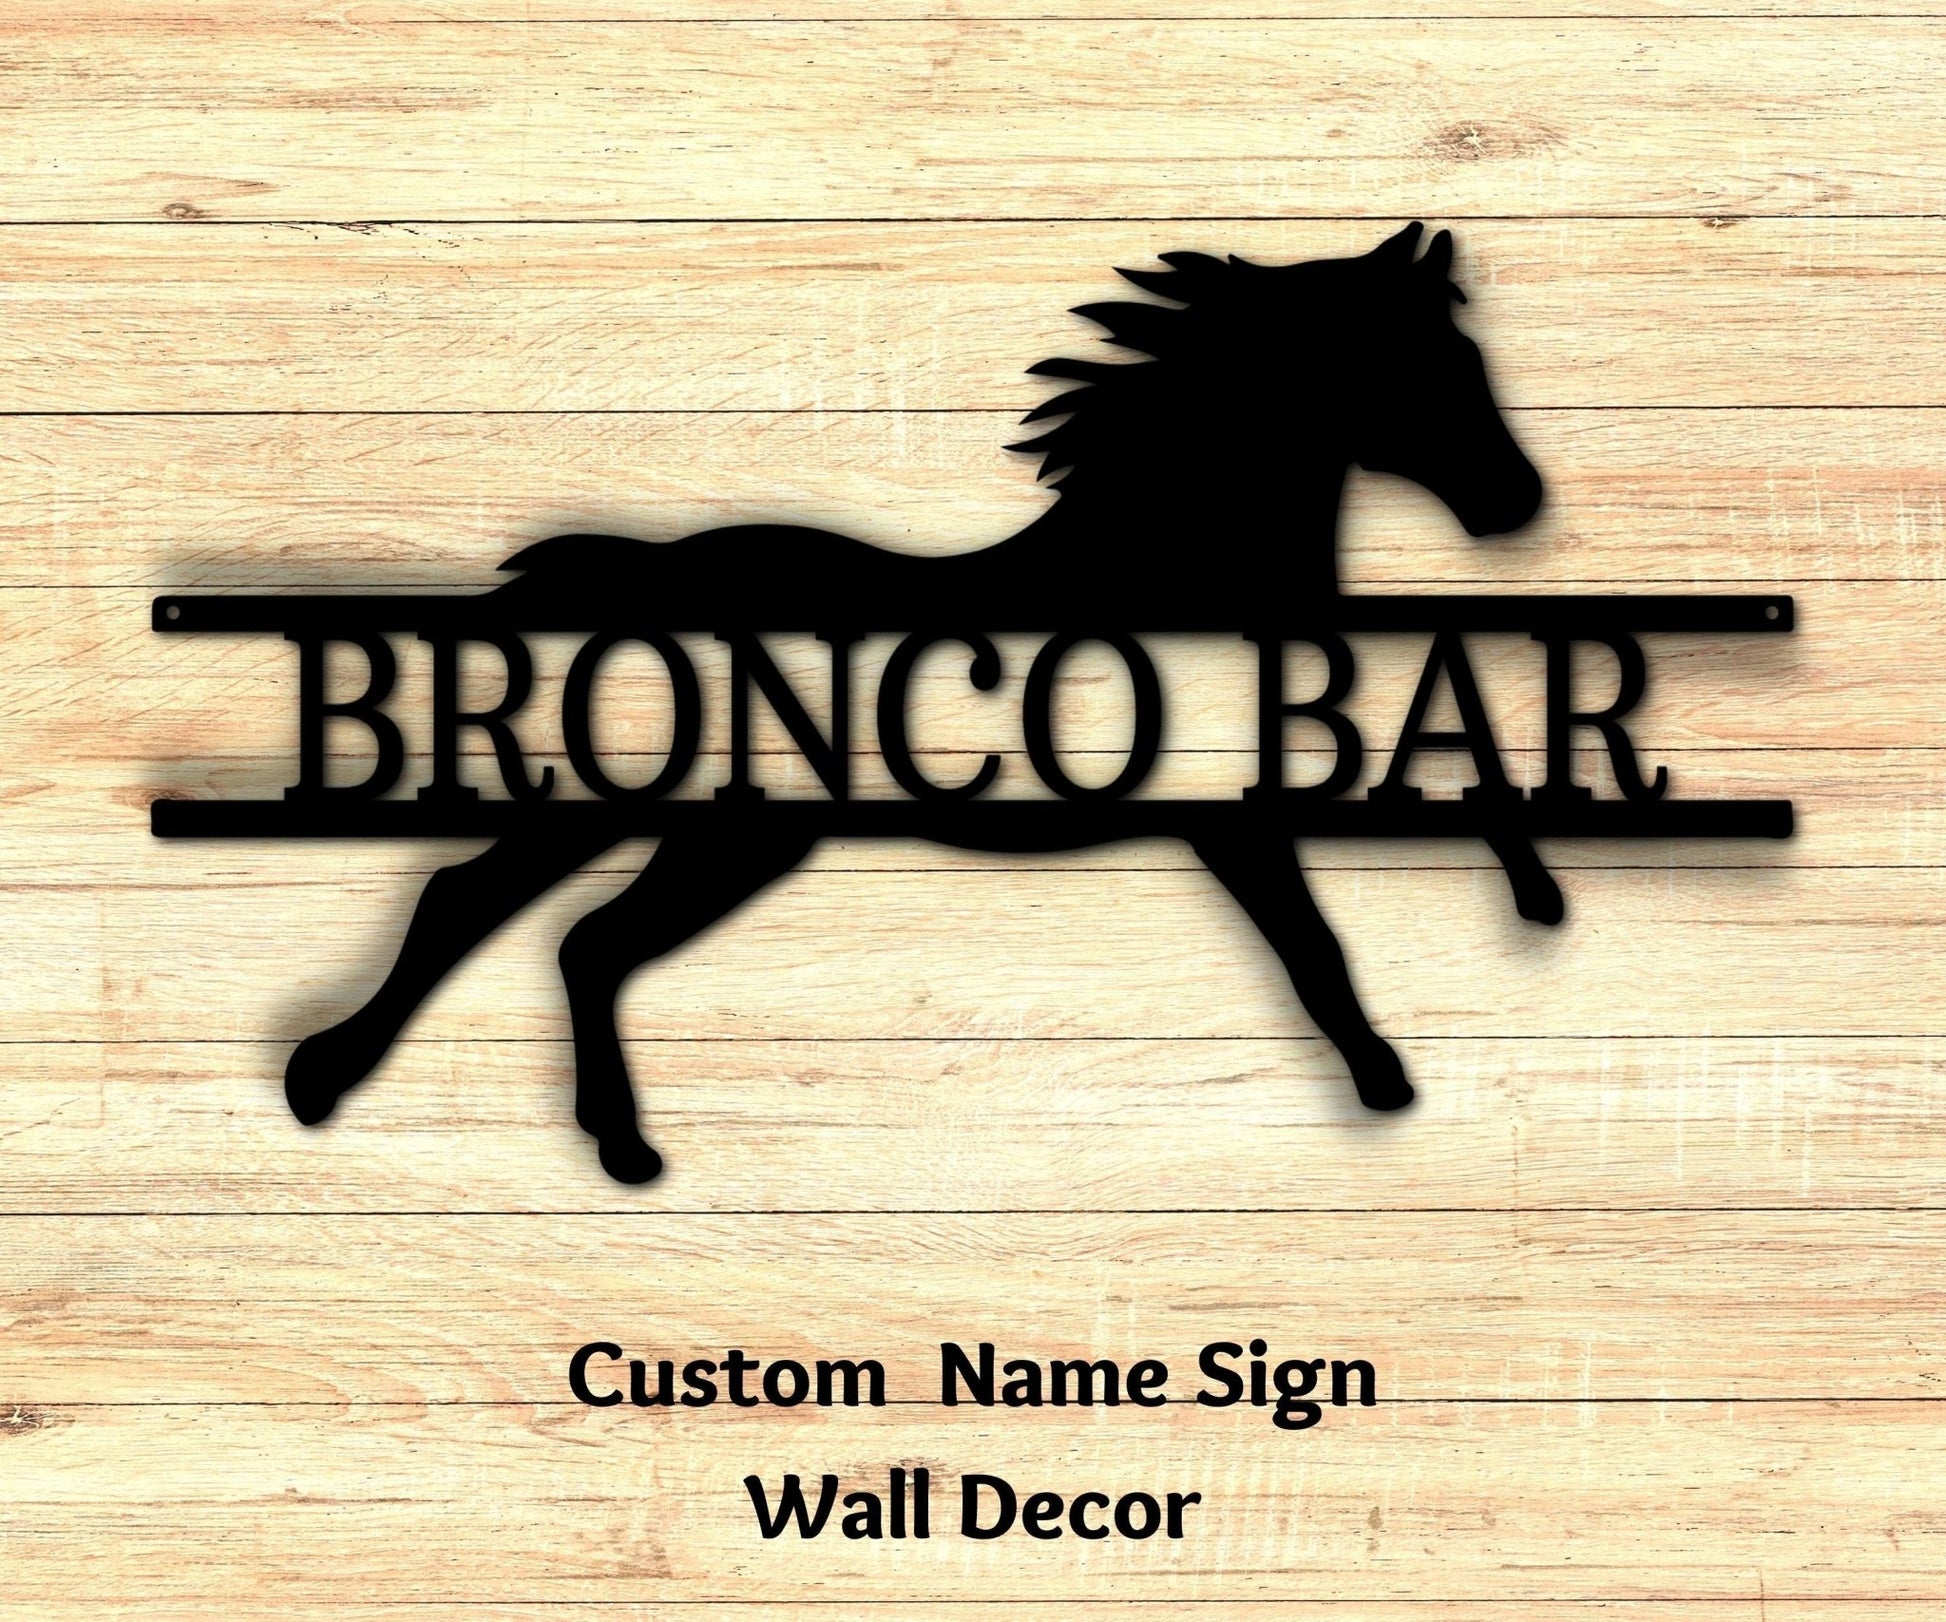 Sprinting Horse Metal Sign - Custom Name Ranch Wall Art for Equestrian Decor - Stylinsoul